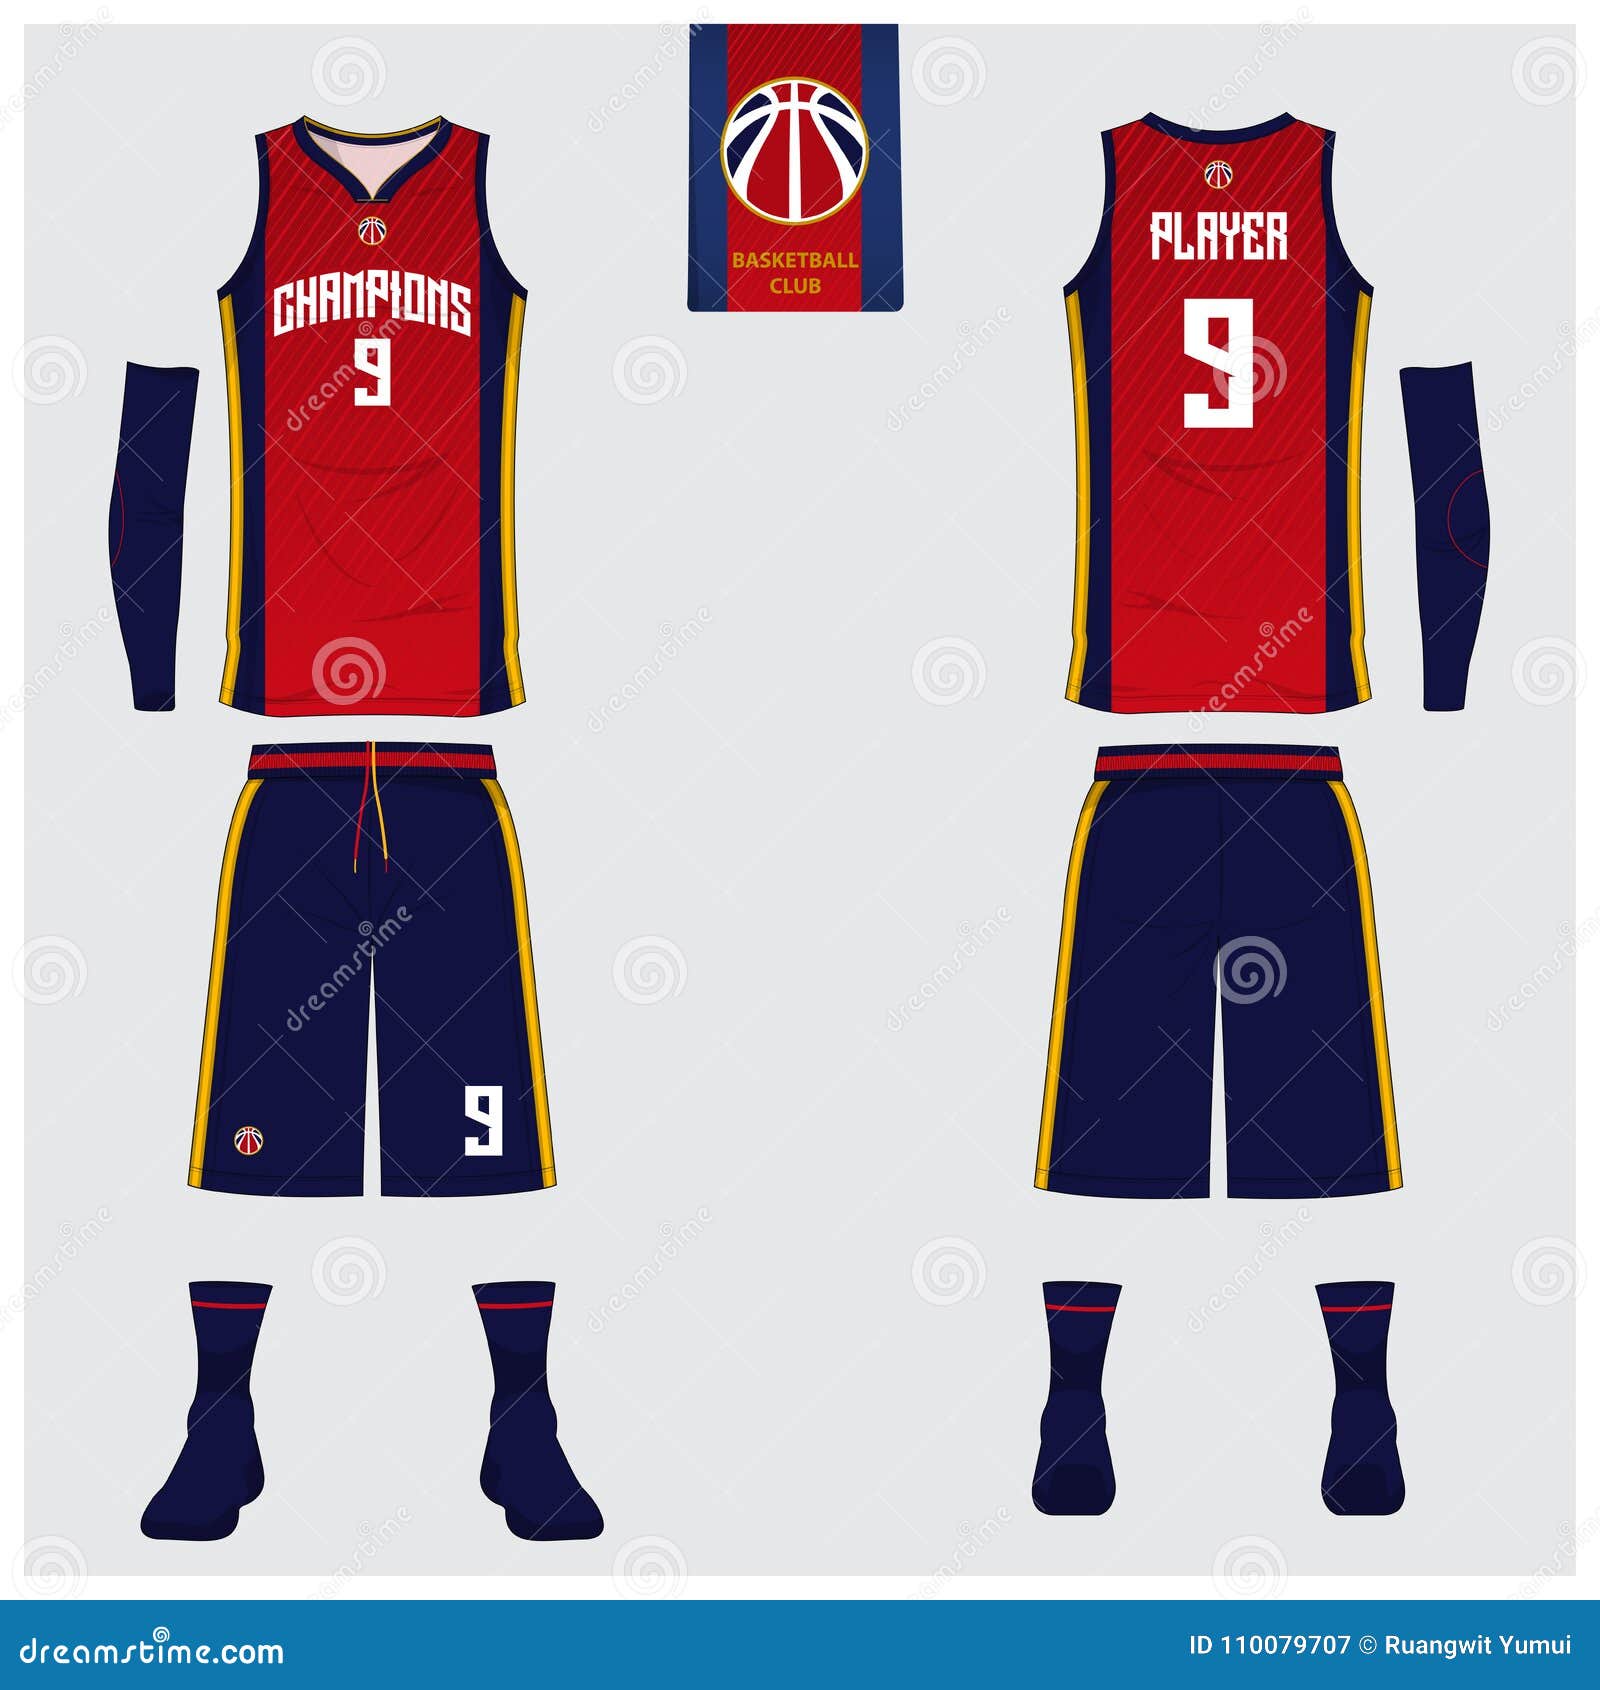 basketball jersey, shorts, socks template for basketball club. front and back view sport uniform. tank top t-shirt mock up.